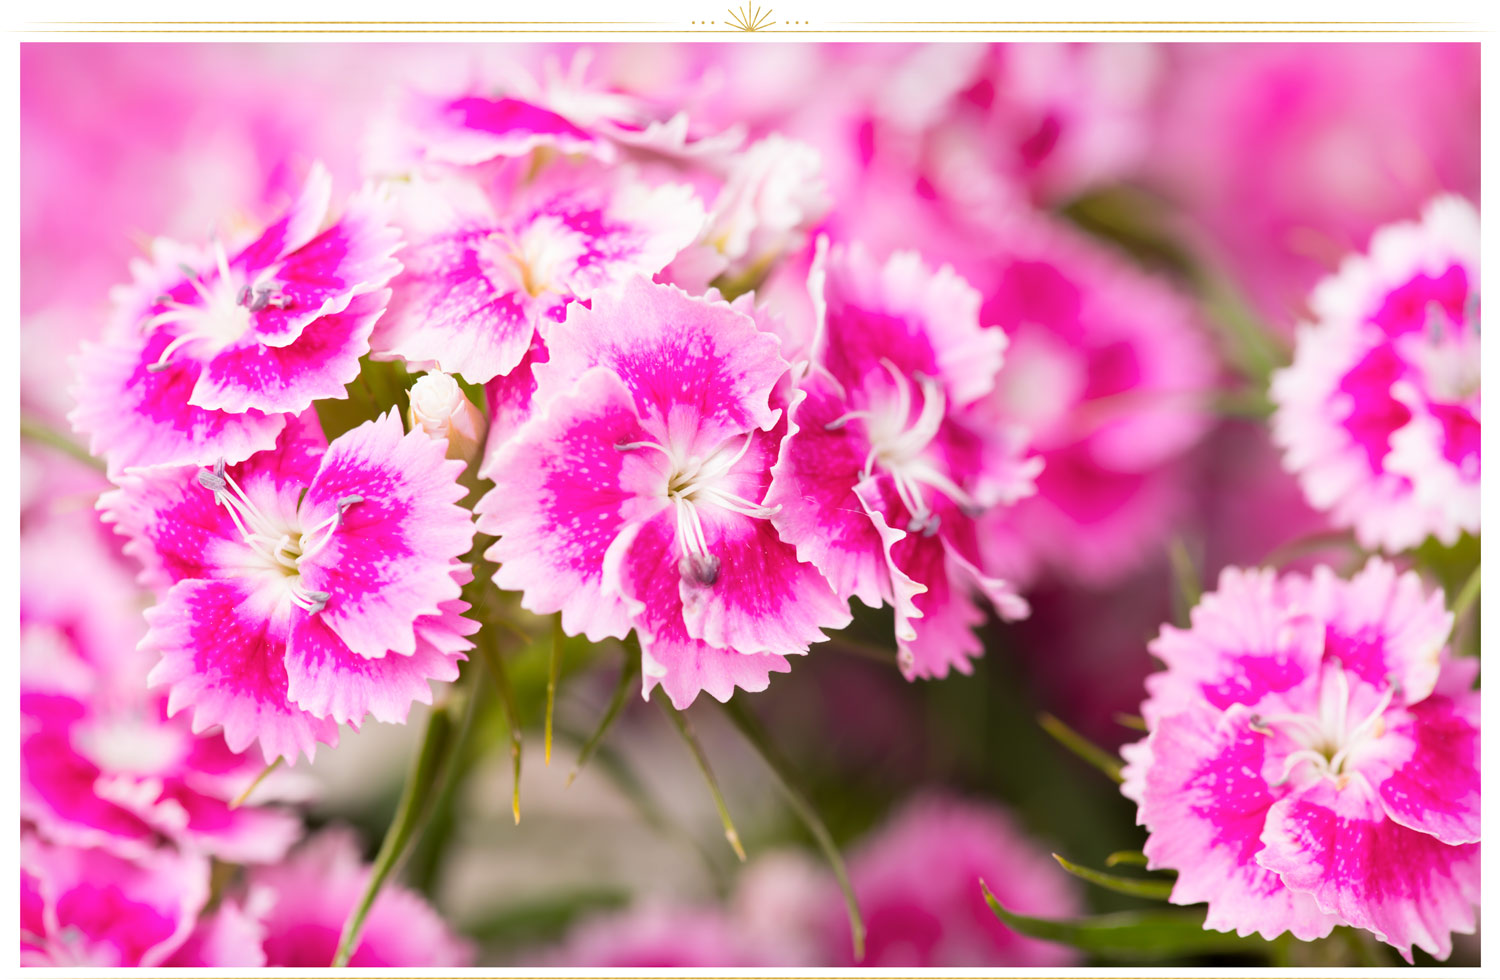 26 Types of Pink Flowers: Tips + Pictures - ProFlowers Blog